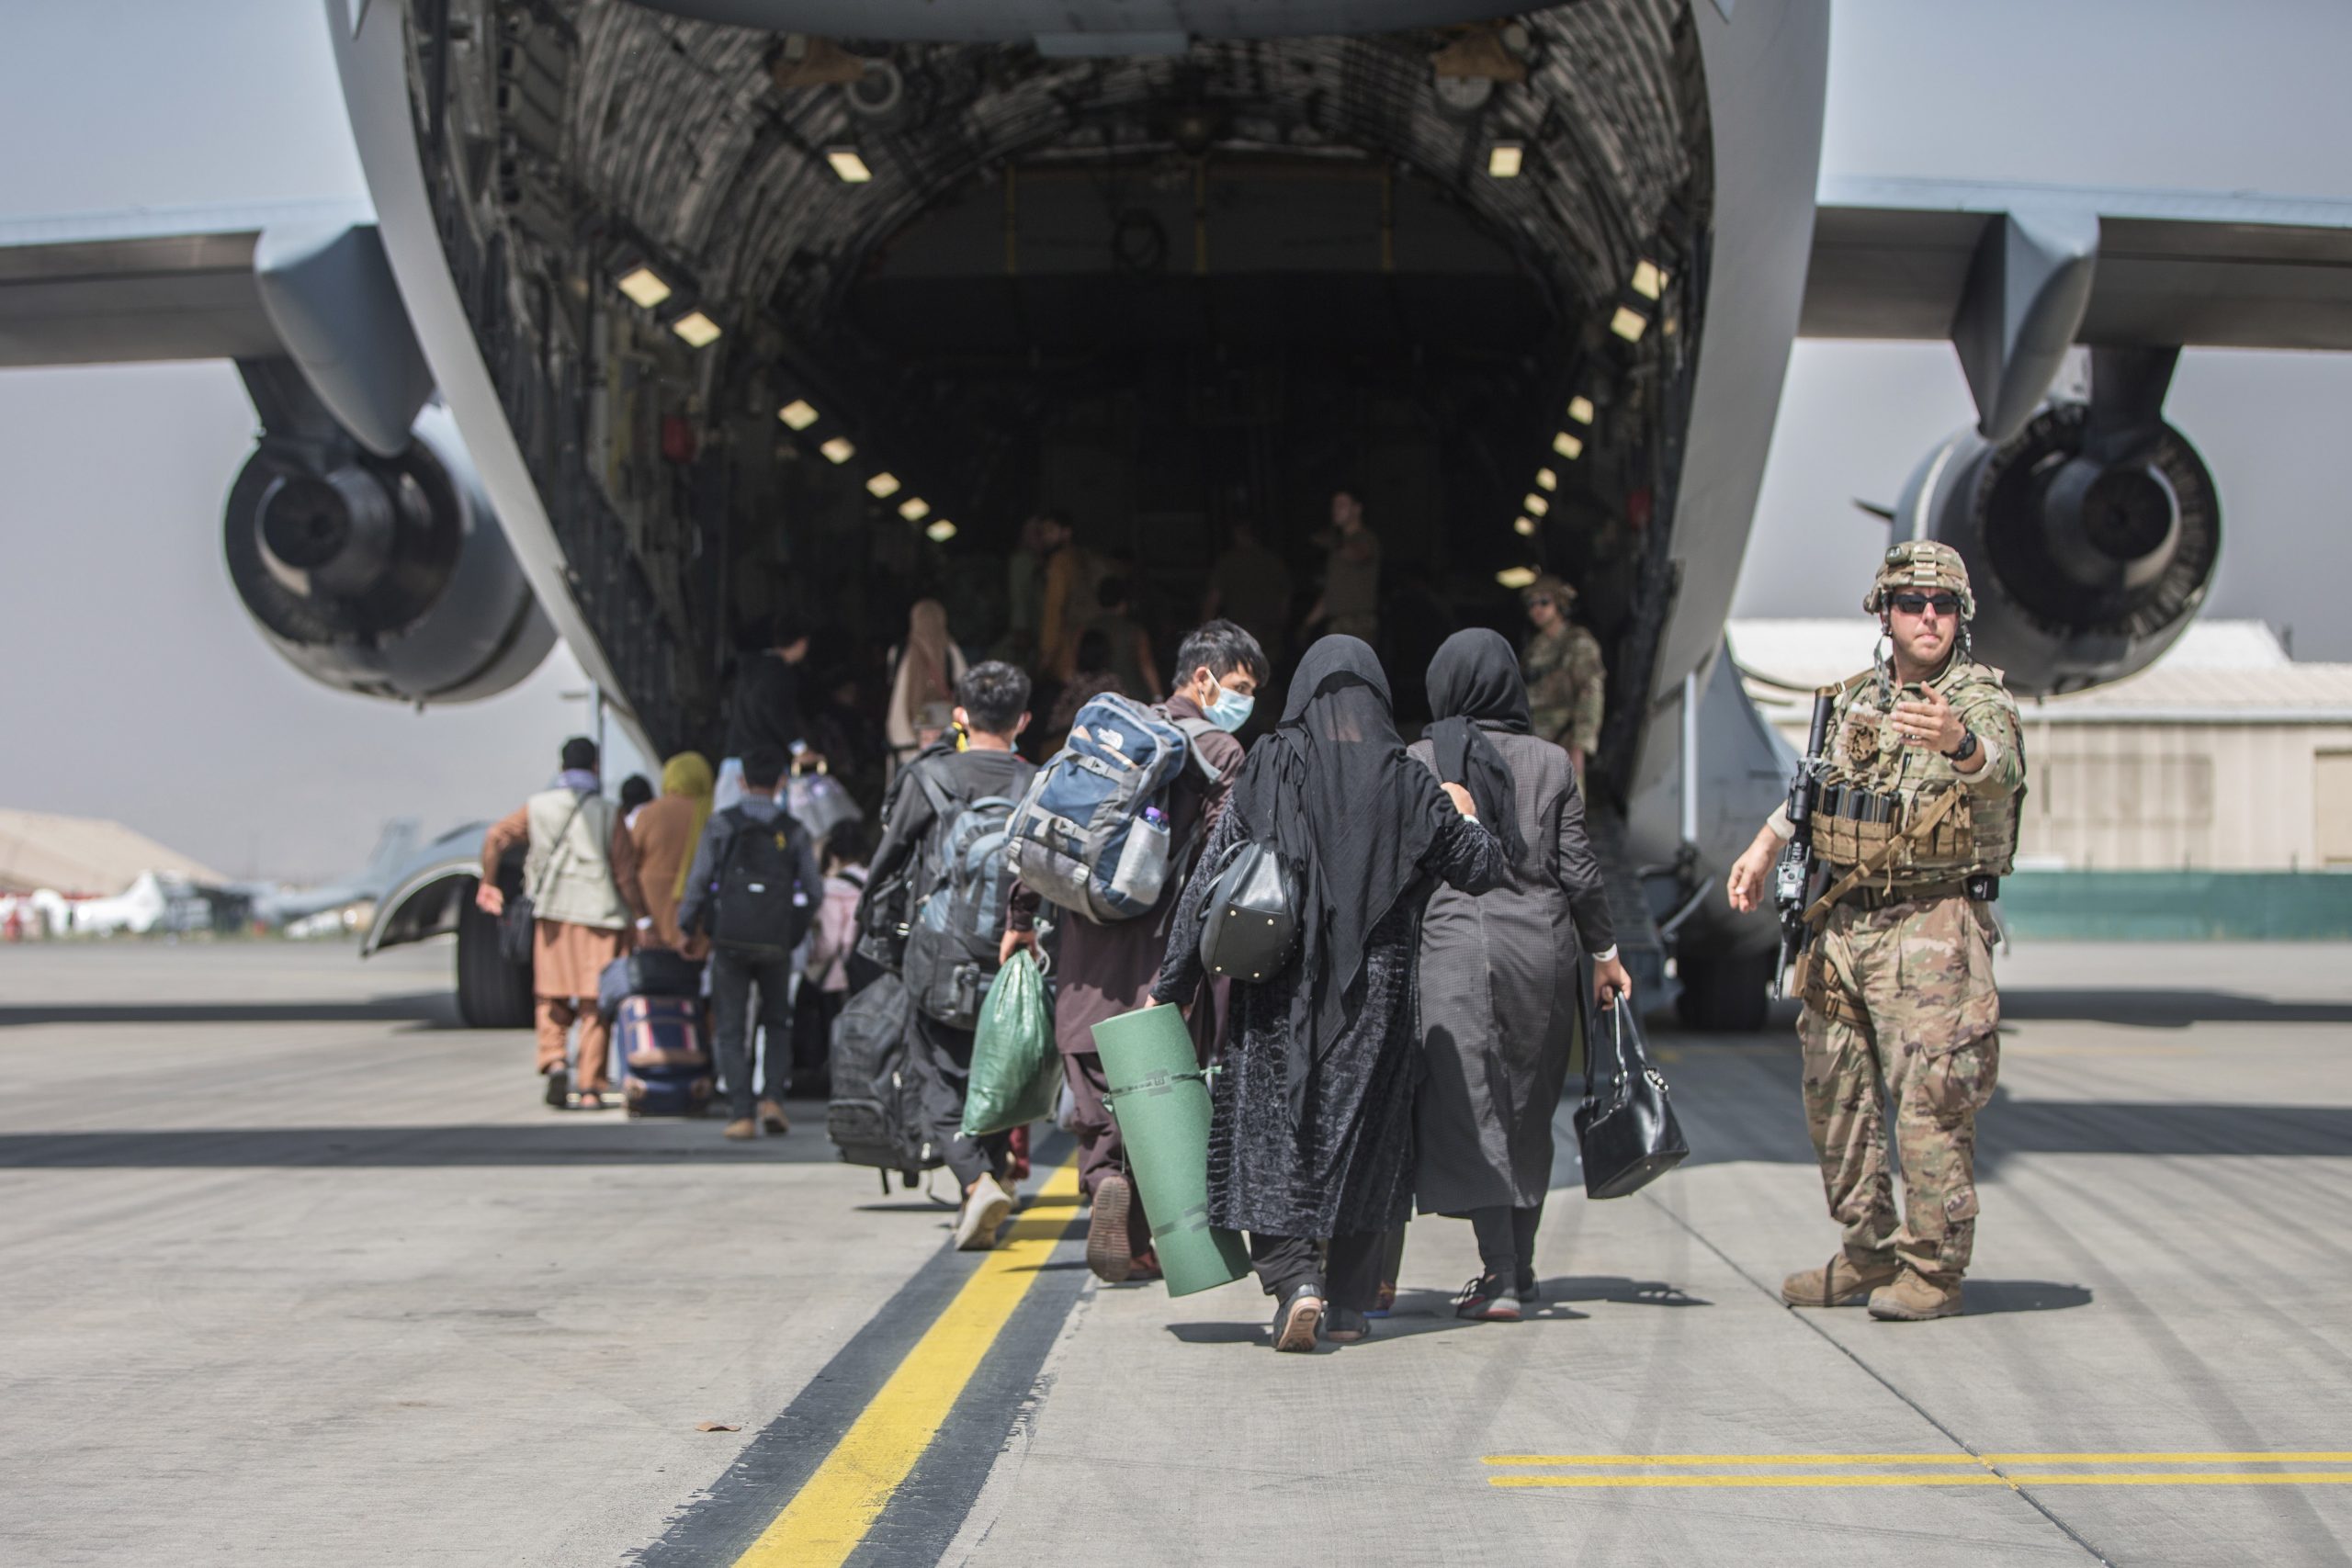 epa09427819 A handout photo made available by the US Marine Corps via DVIDS showing families begin to board a US Air Force Boeing C-17 Globemaster III during an evacuation at Hamid Karzai International Airport, Kabul, Afghanistan, 23 August 2021. US service members are assisting the Department of State with an orderly drawdown of designated personnel in Afghanistan.  EPA/Sgt. Samuel Ruiz / US Marine Corps via DVIDS / HANDOUT Released

Maj. John Rigsbee

U.S. Central Command Public Affairs

John.j.rigsbee.mil@mail.mil

(813) 529-0214

via DVIDS HANDOUT EDITORIAL USE ONLY/NO SALES